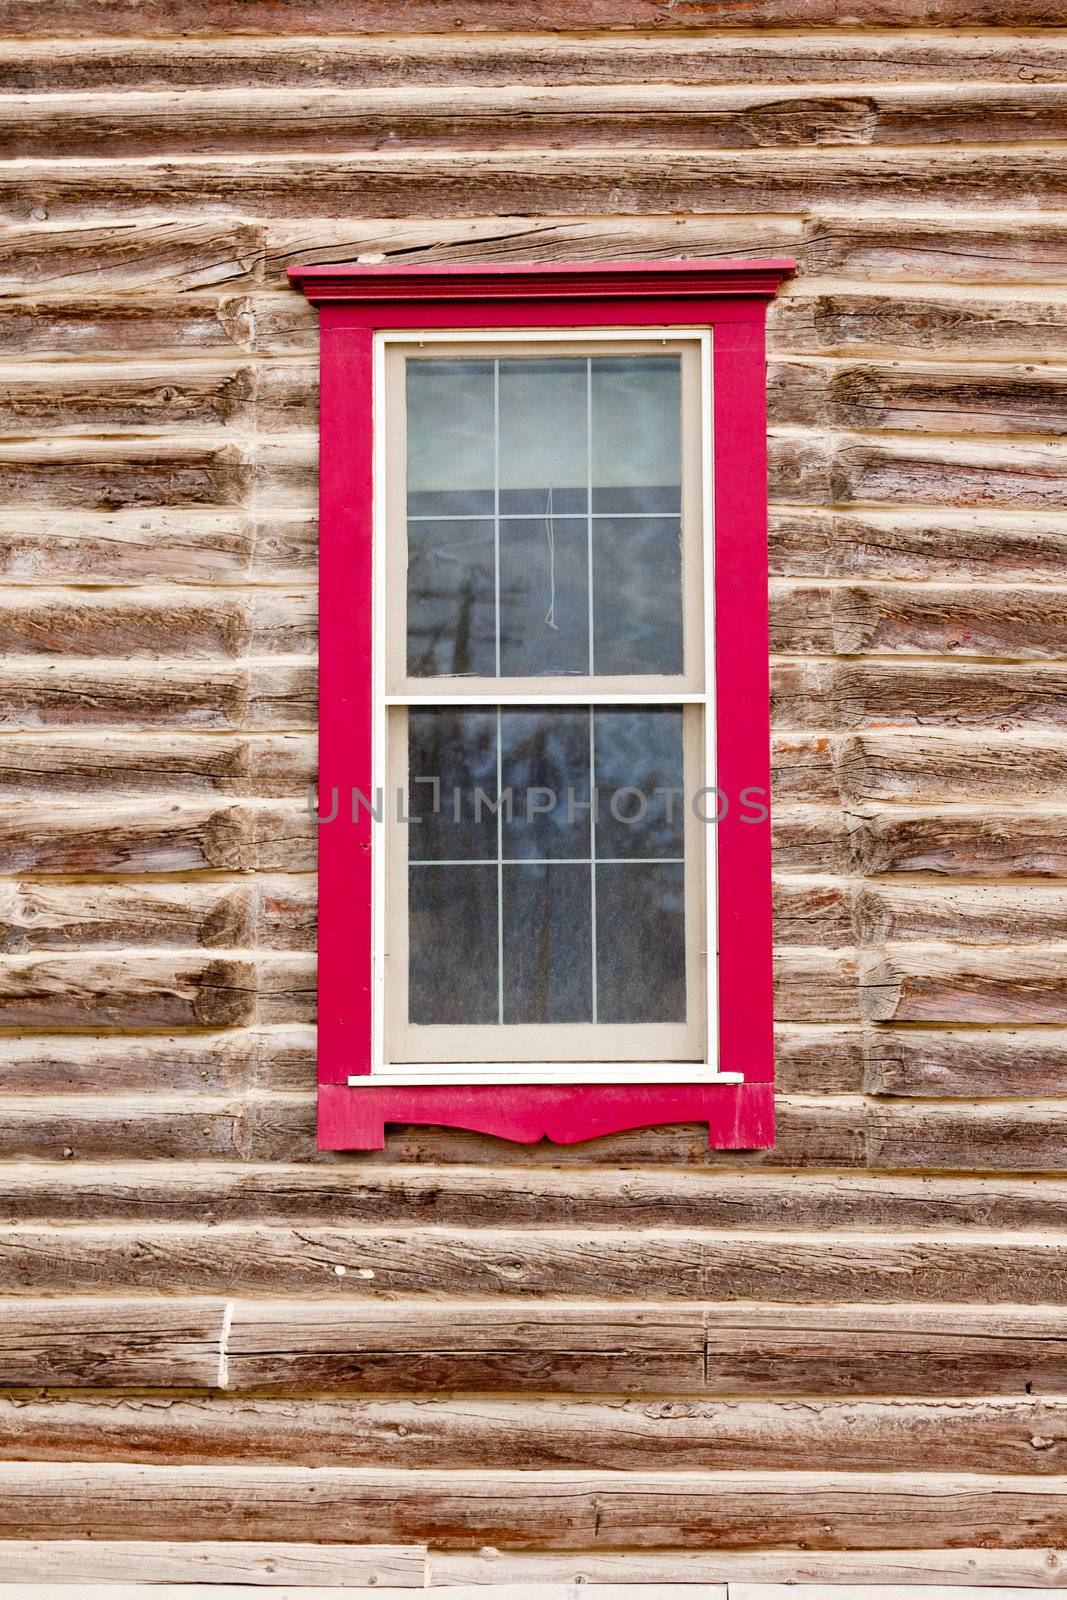 Red framed window in log house wall architecture by PiLens